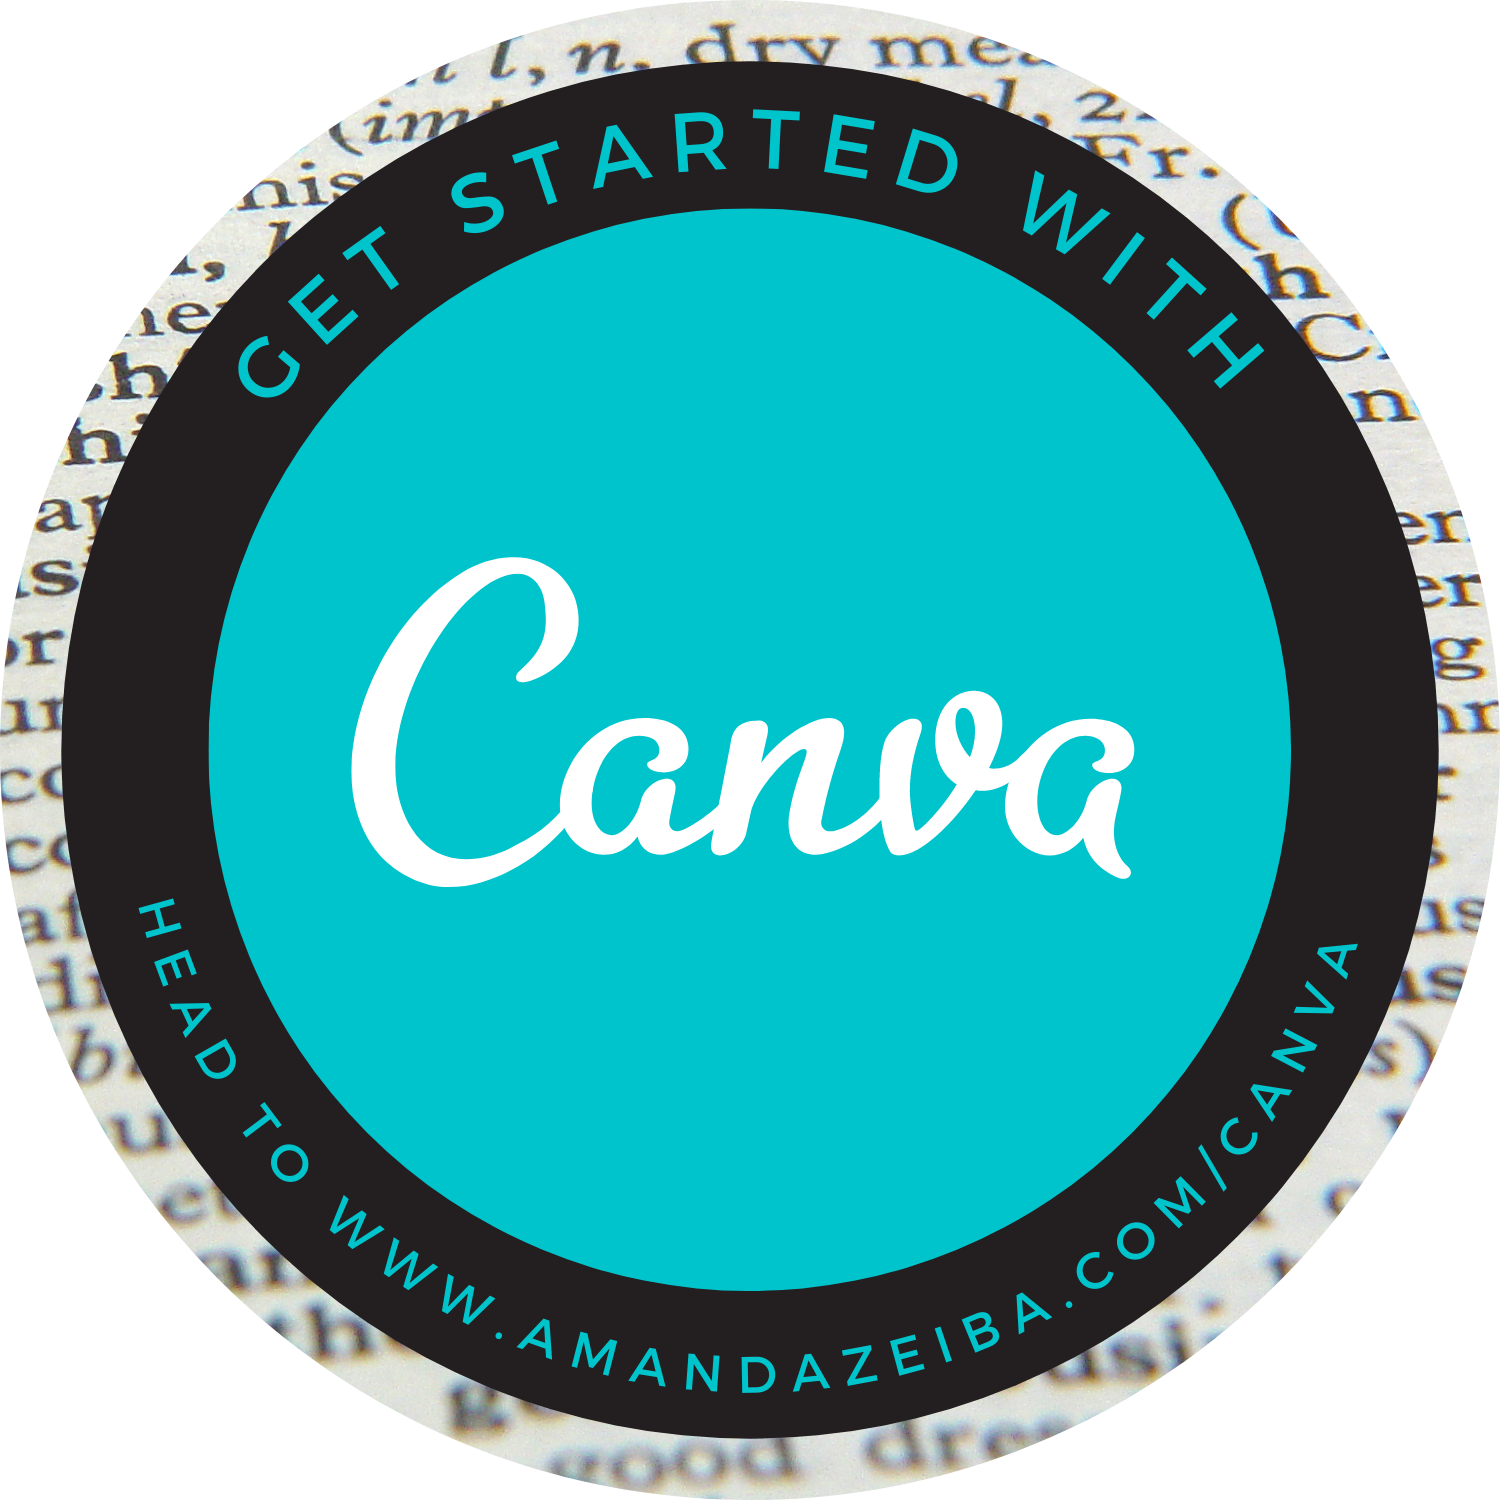 Learn to Design Images with Canva (for FREE)!